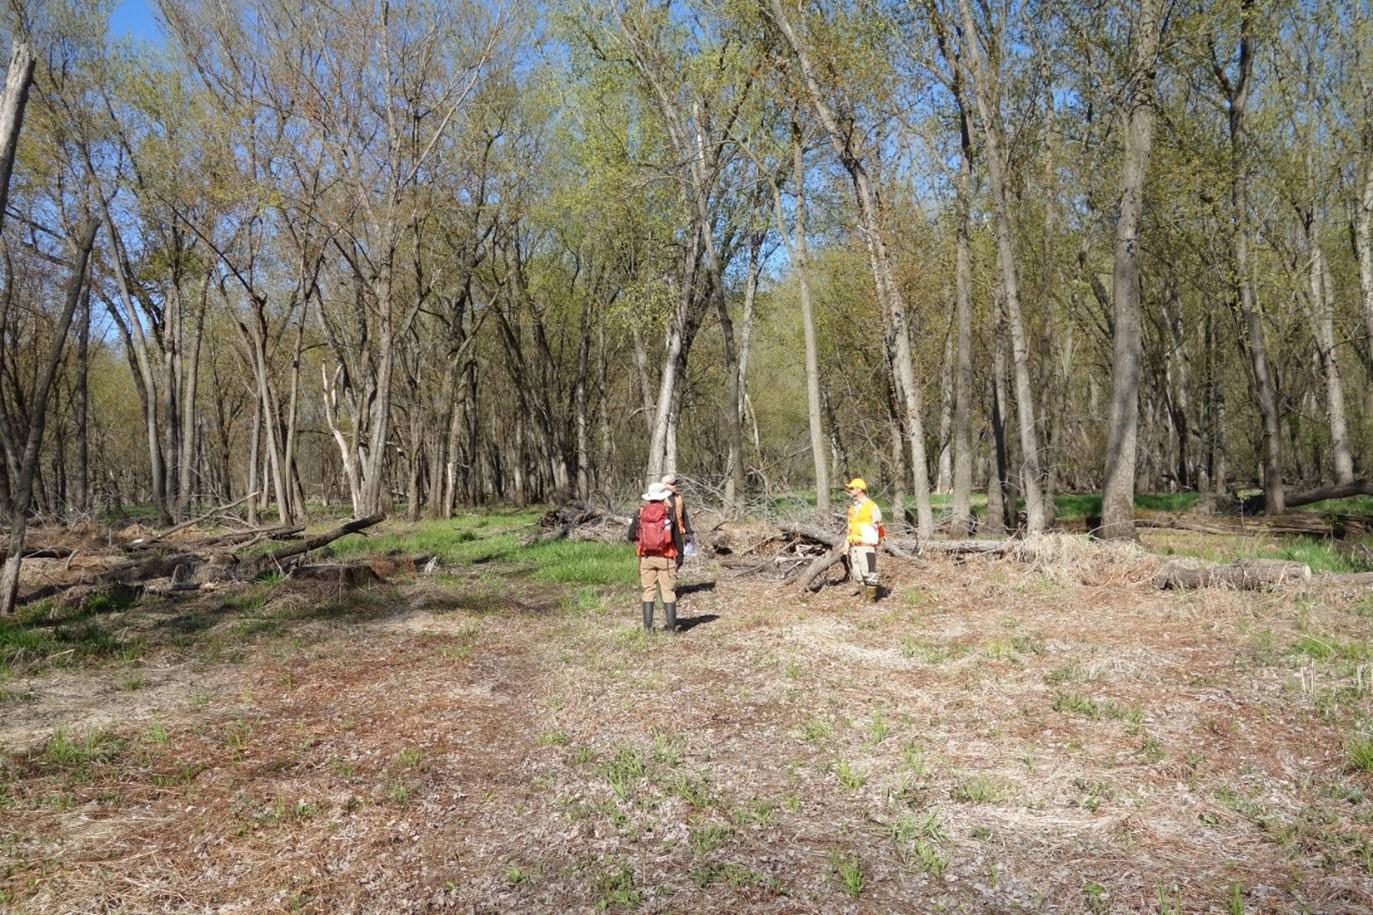 Field staff assessing regeneration in a harvest patch, spring 2021.